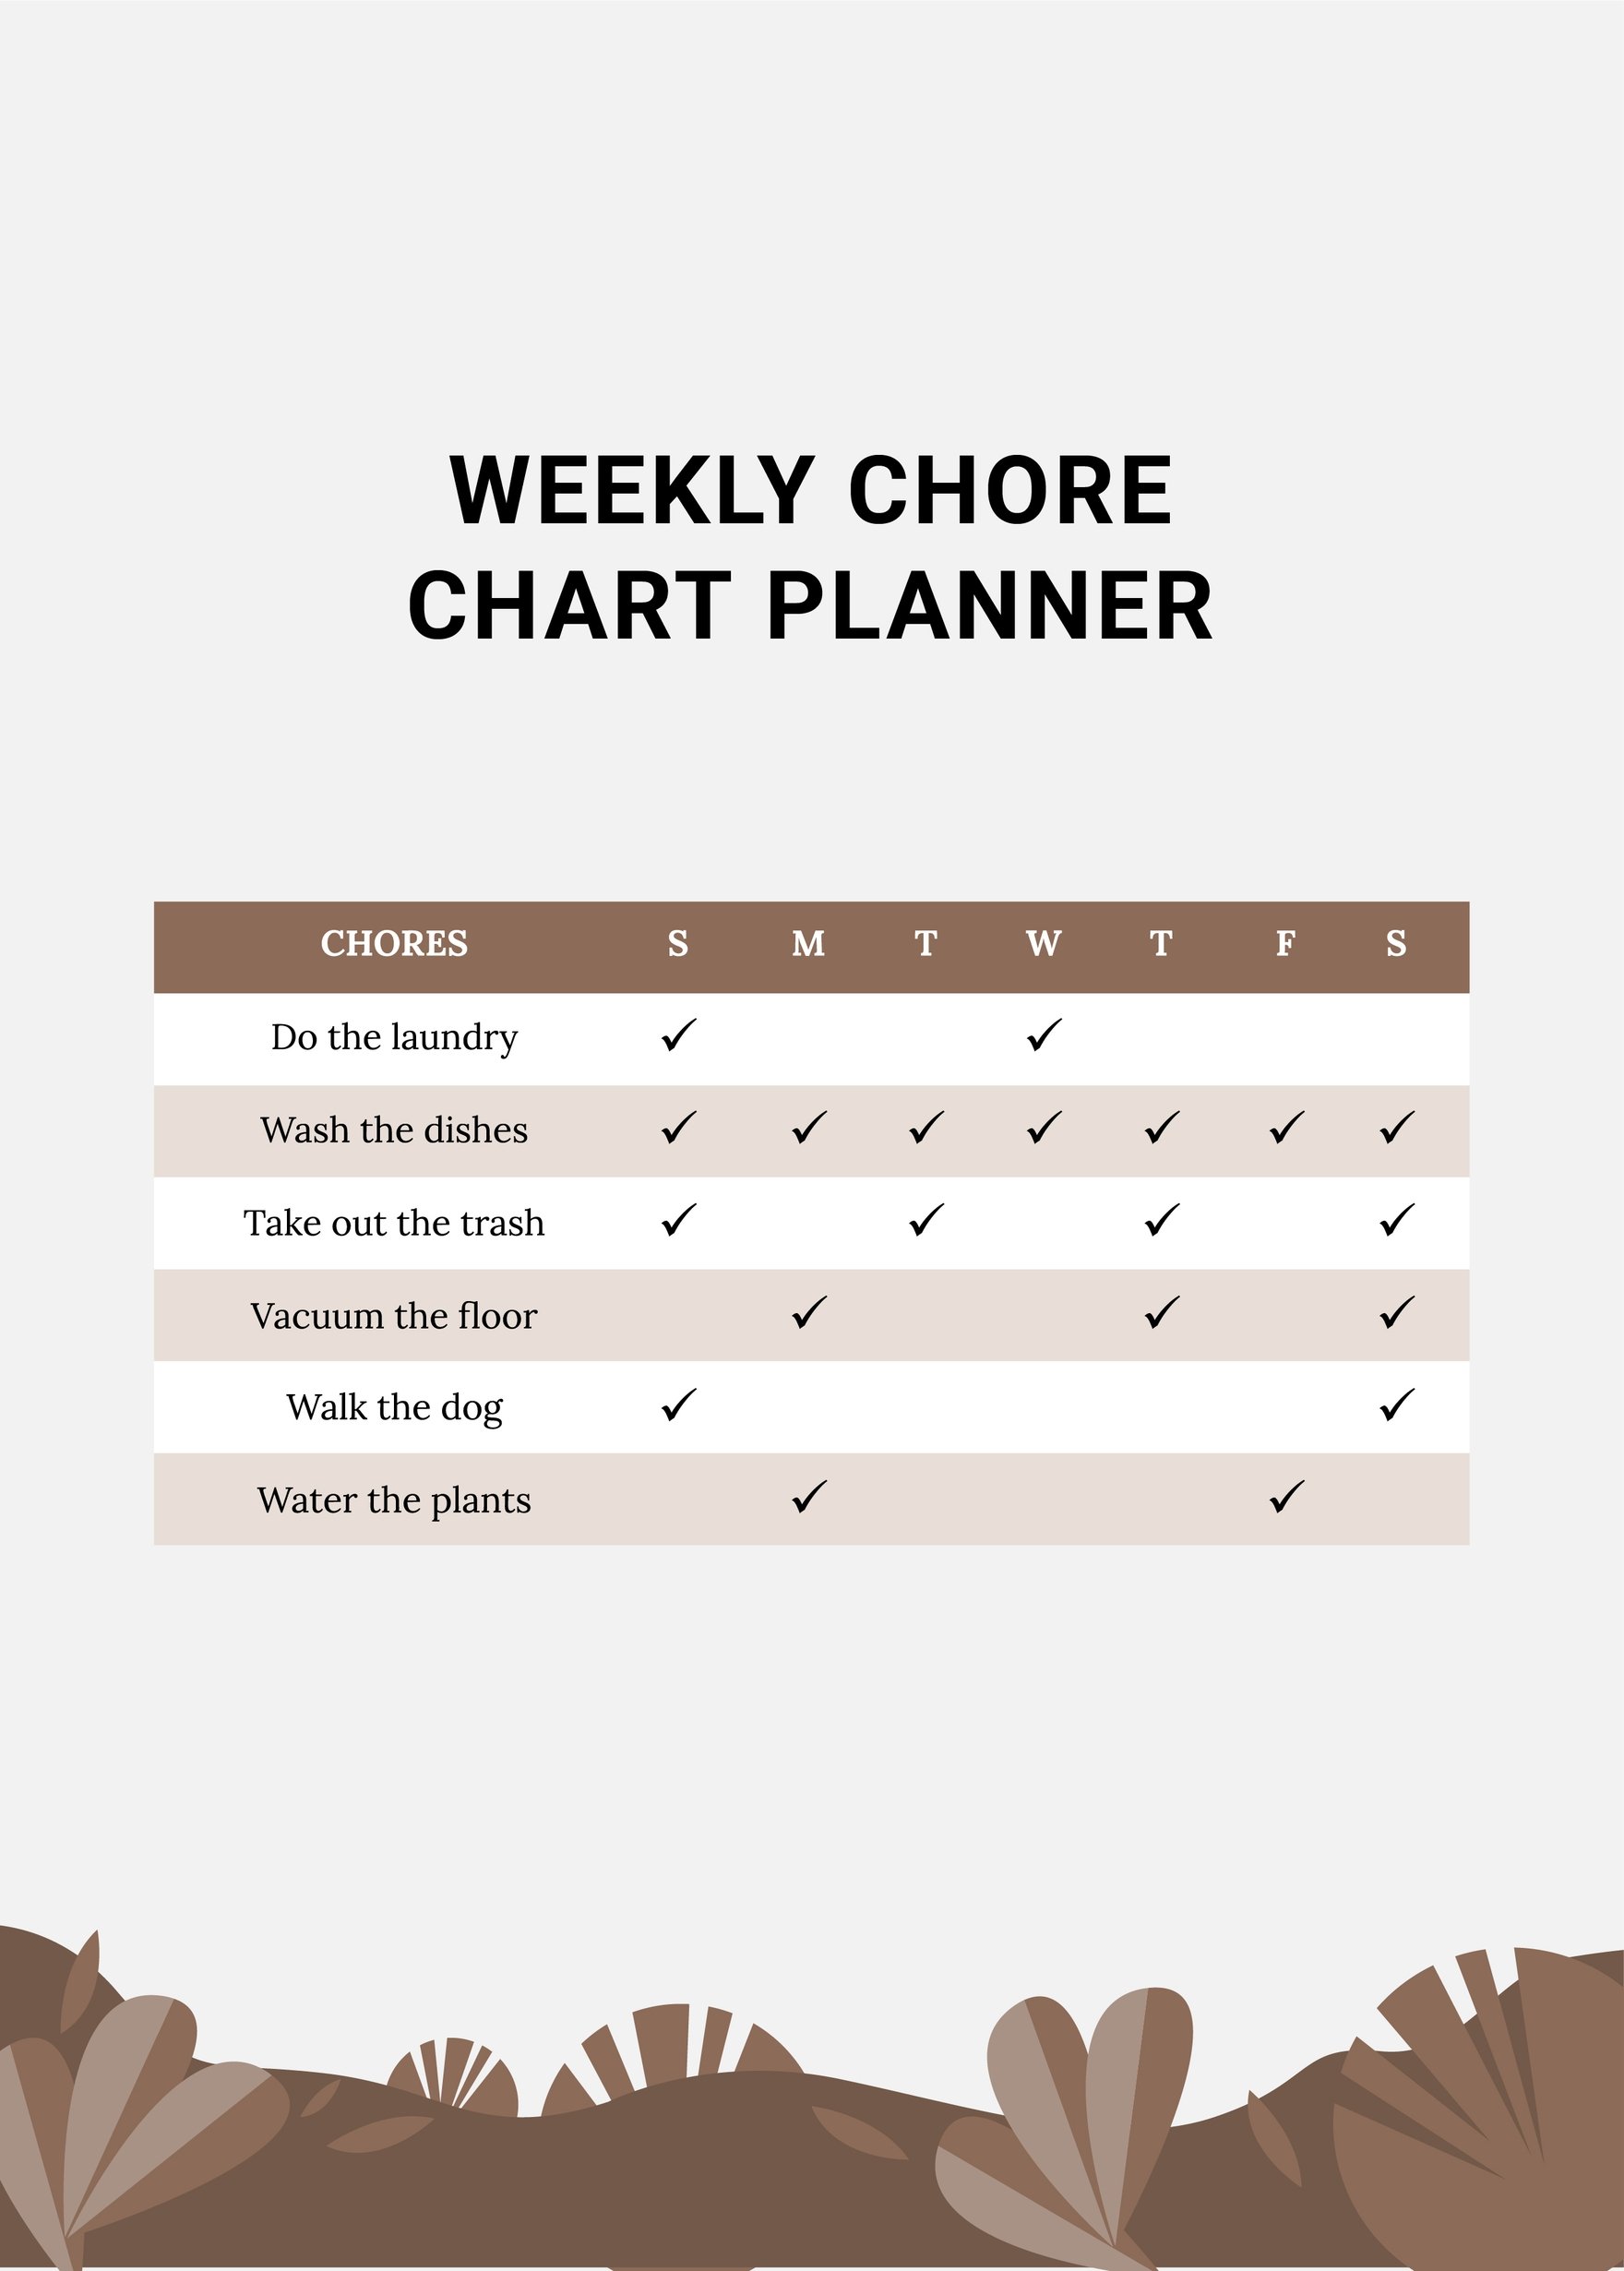 Weekly Chore Chart Planner